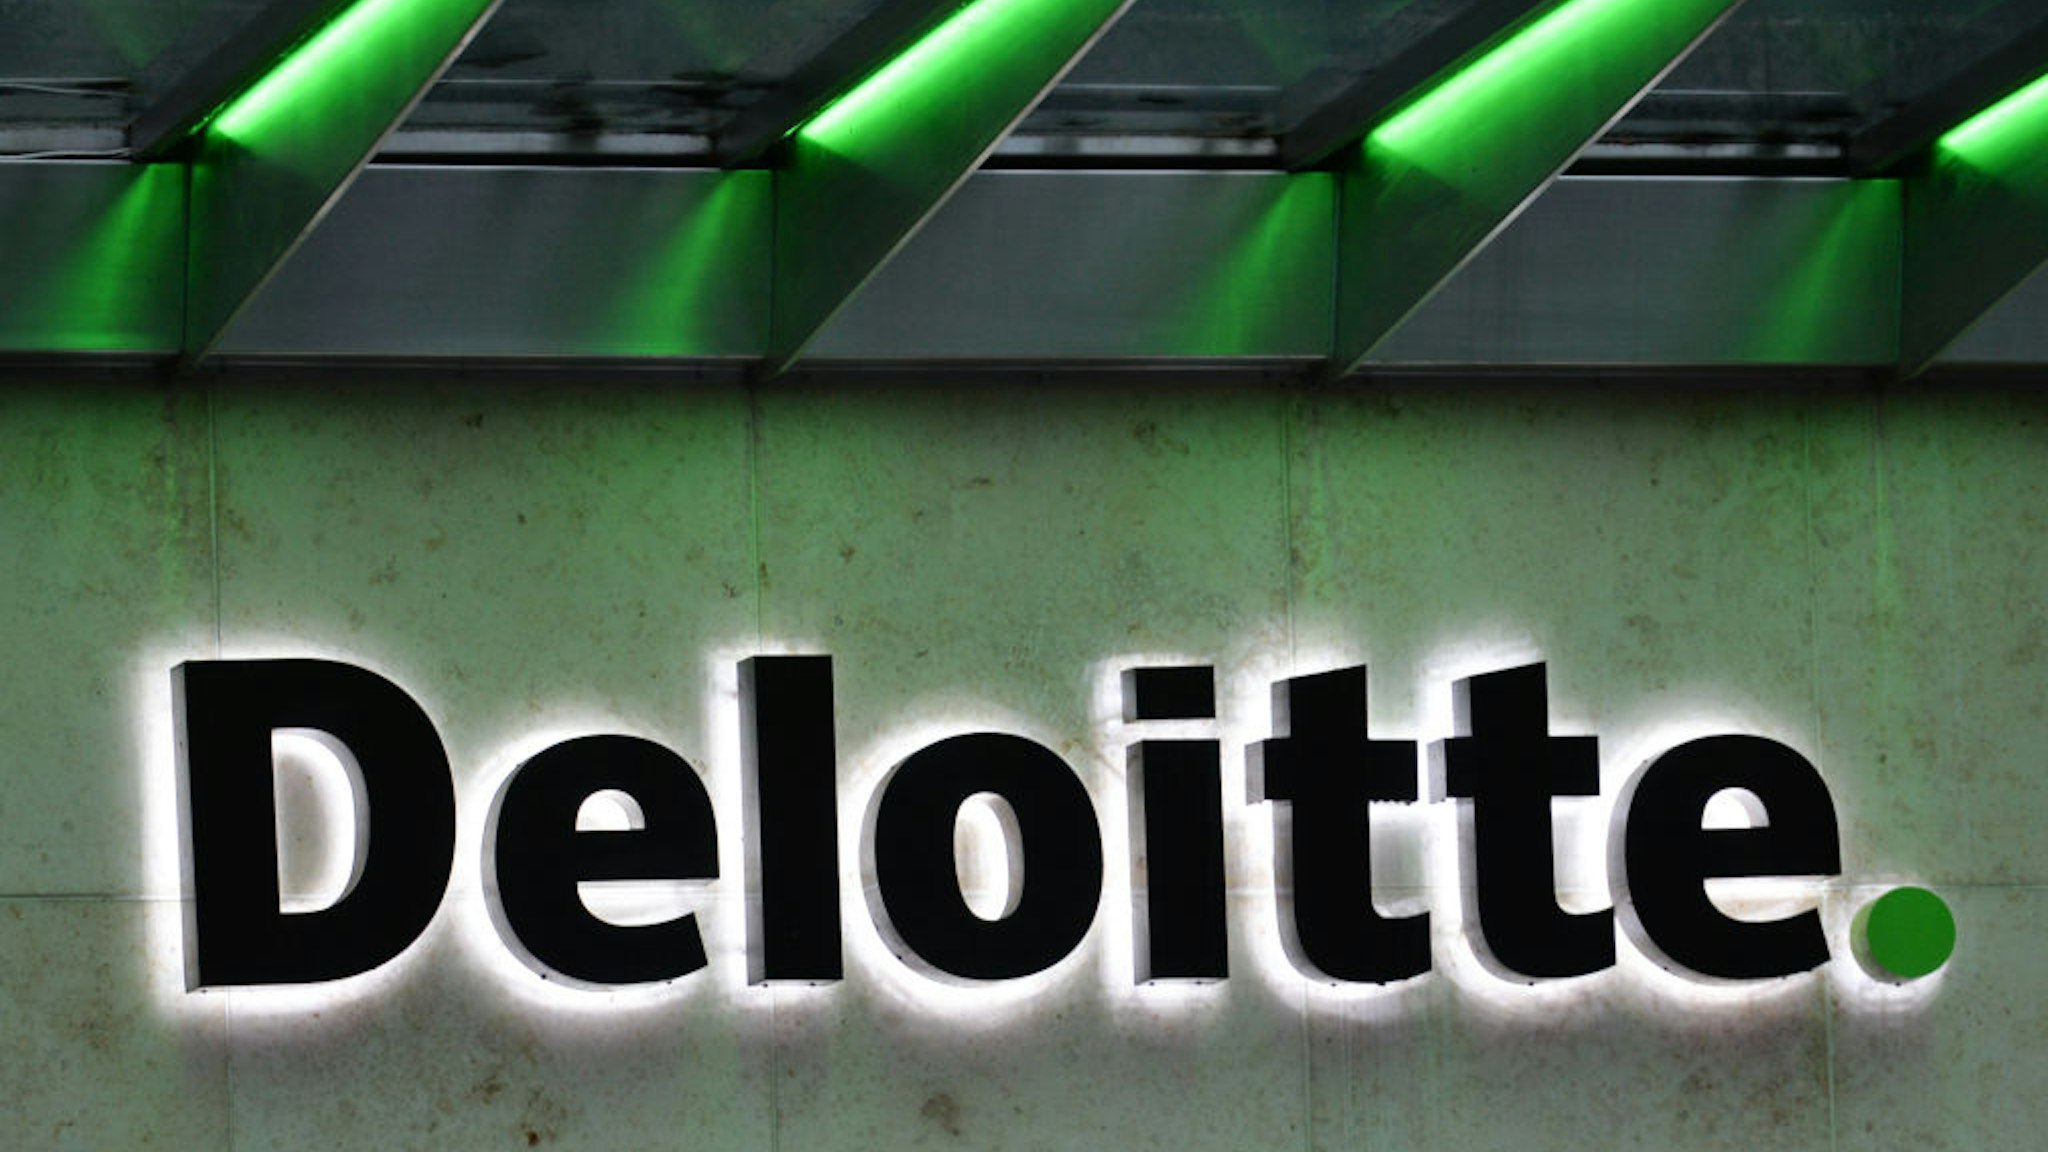 A view of the Deloitte logo seen in Dublin city centre during Level 5 Covid-19 lockdown. The Department of Health reported this evening 2,001 of new Covid-19 cases for the Republic of Ireland and 93 deaths, a new record for a confirmed number of daily deaths. On Tuesday, 19 January, 2021, in Dublin, Ireland.